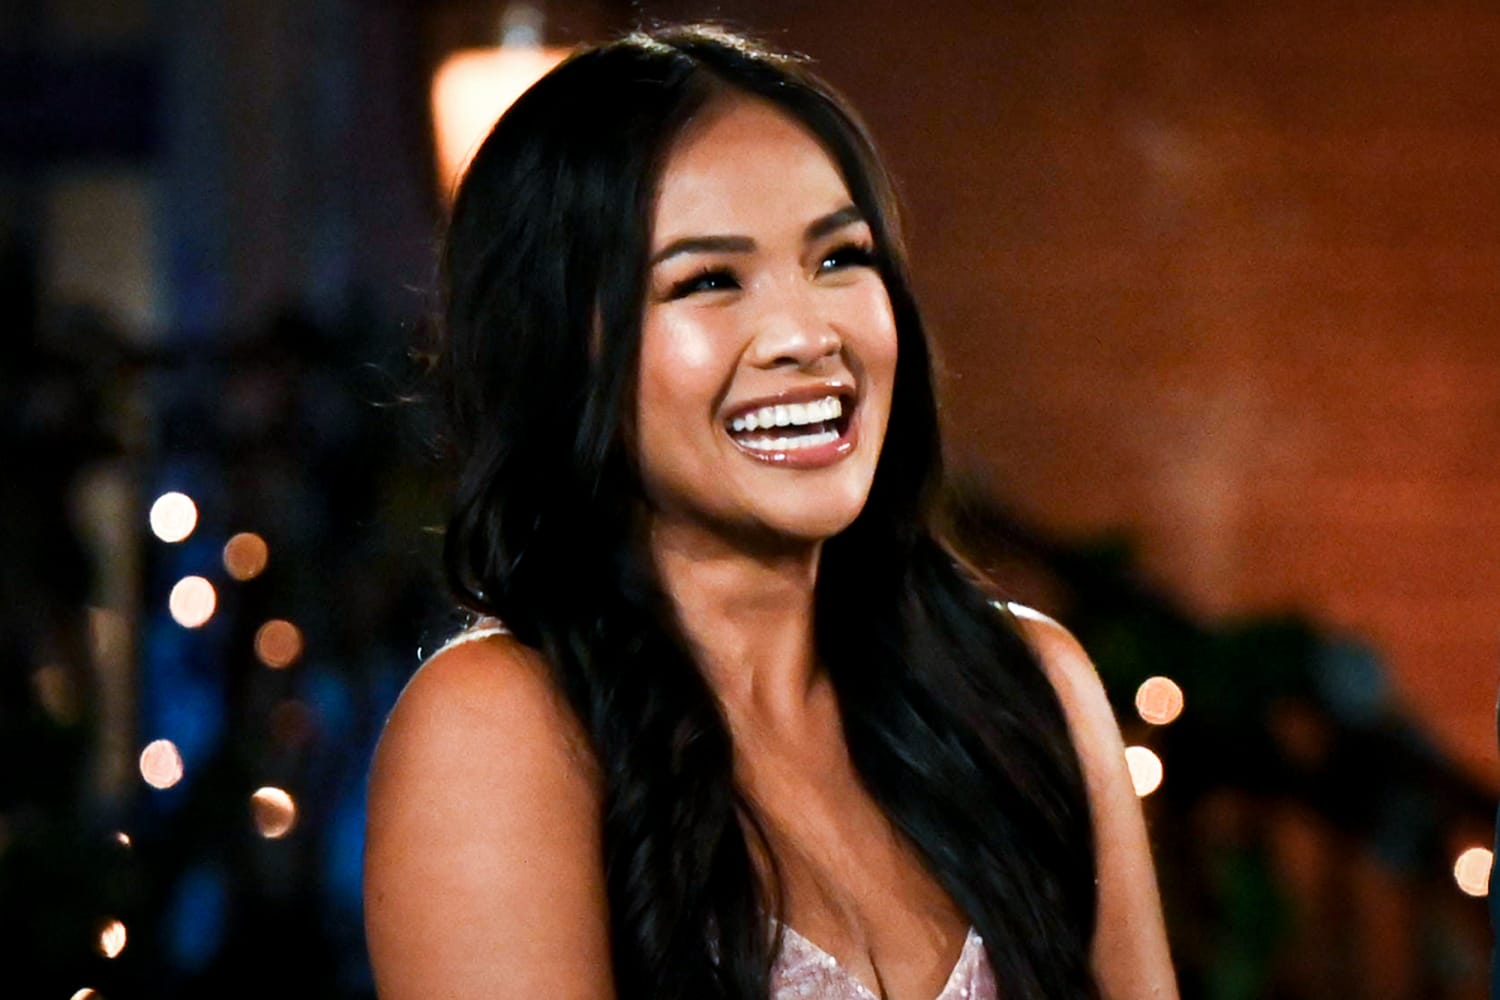 Jane Tran was named the first Asian American Bachelorette